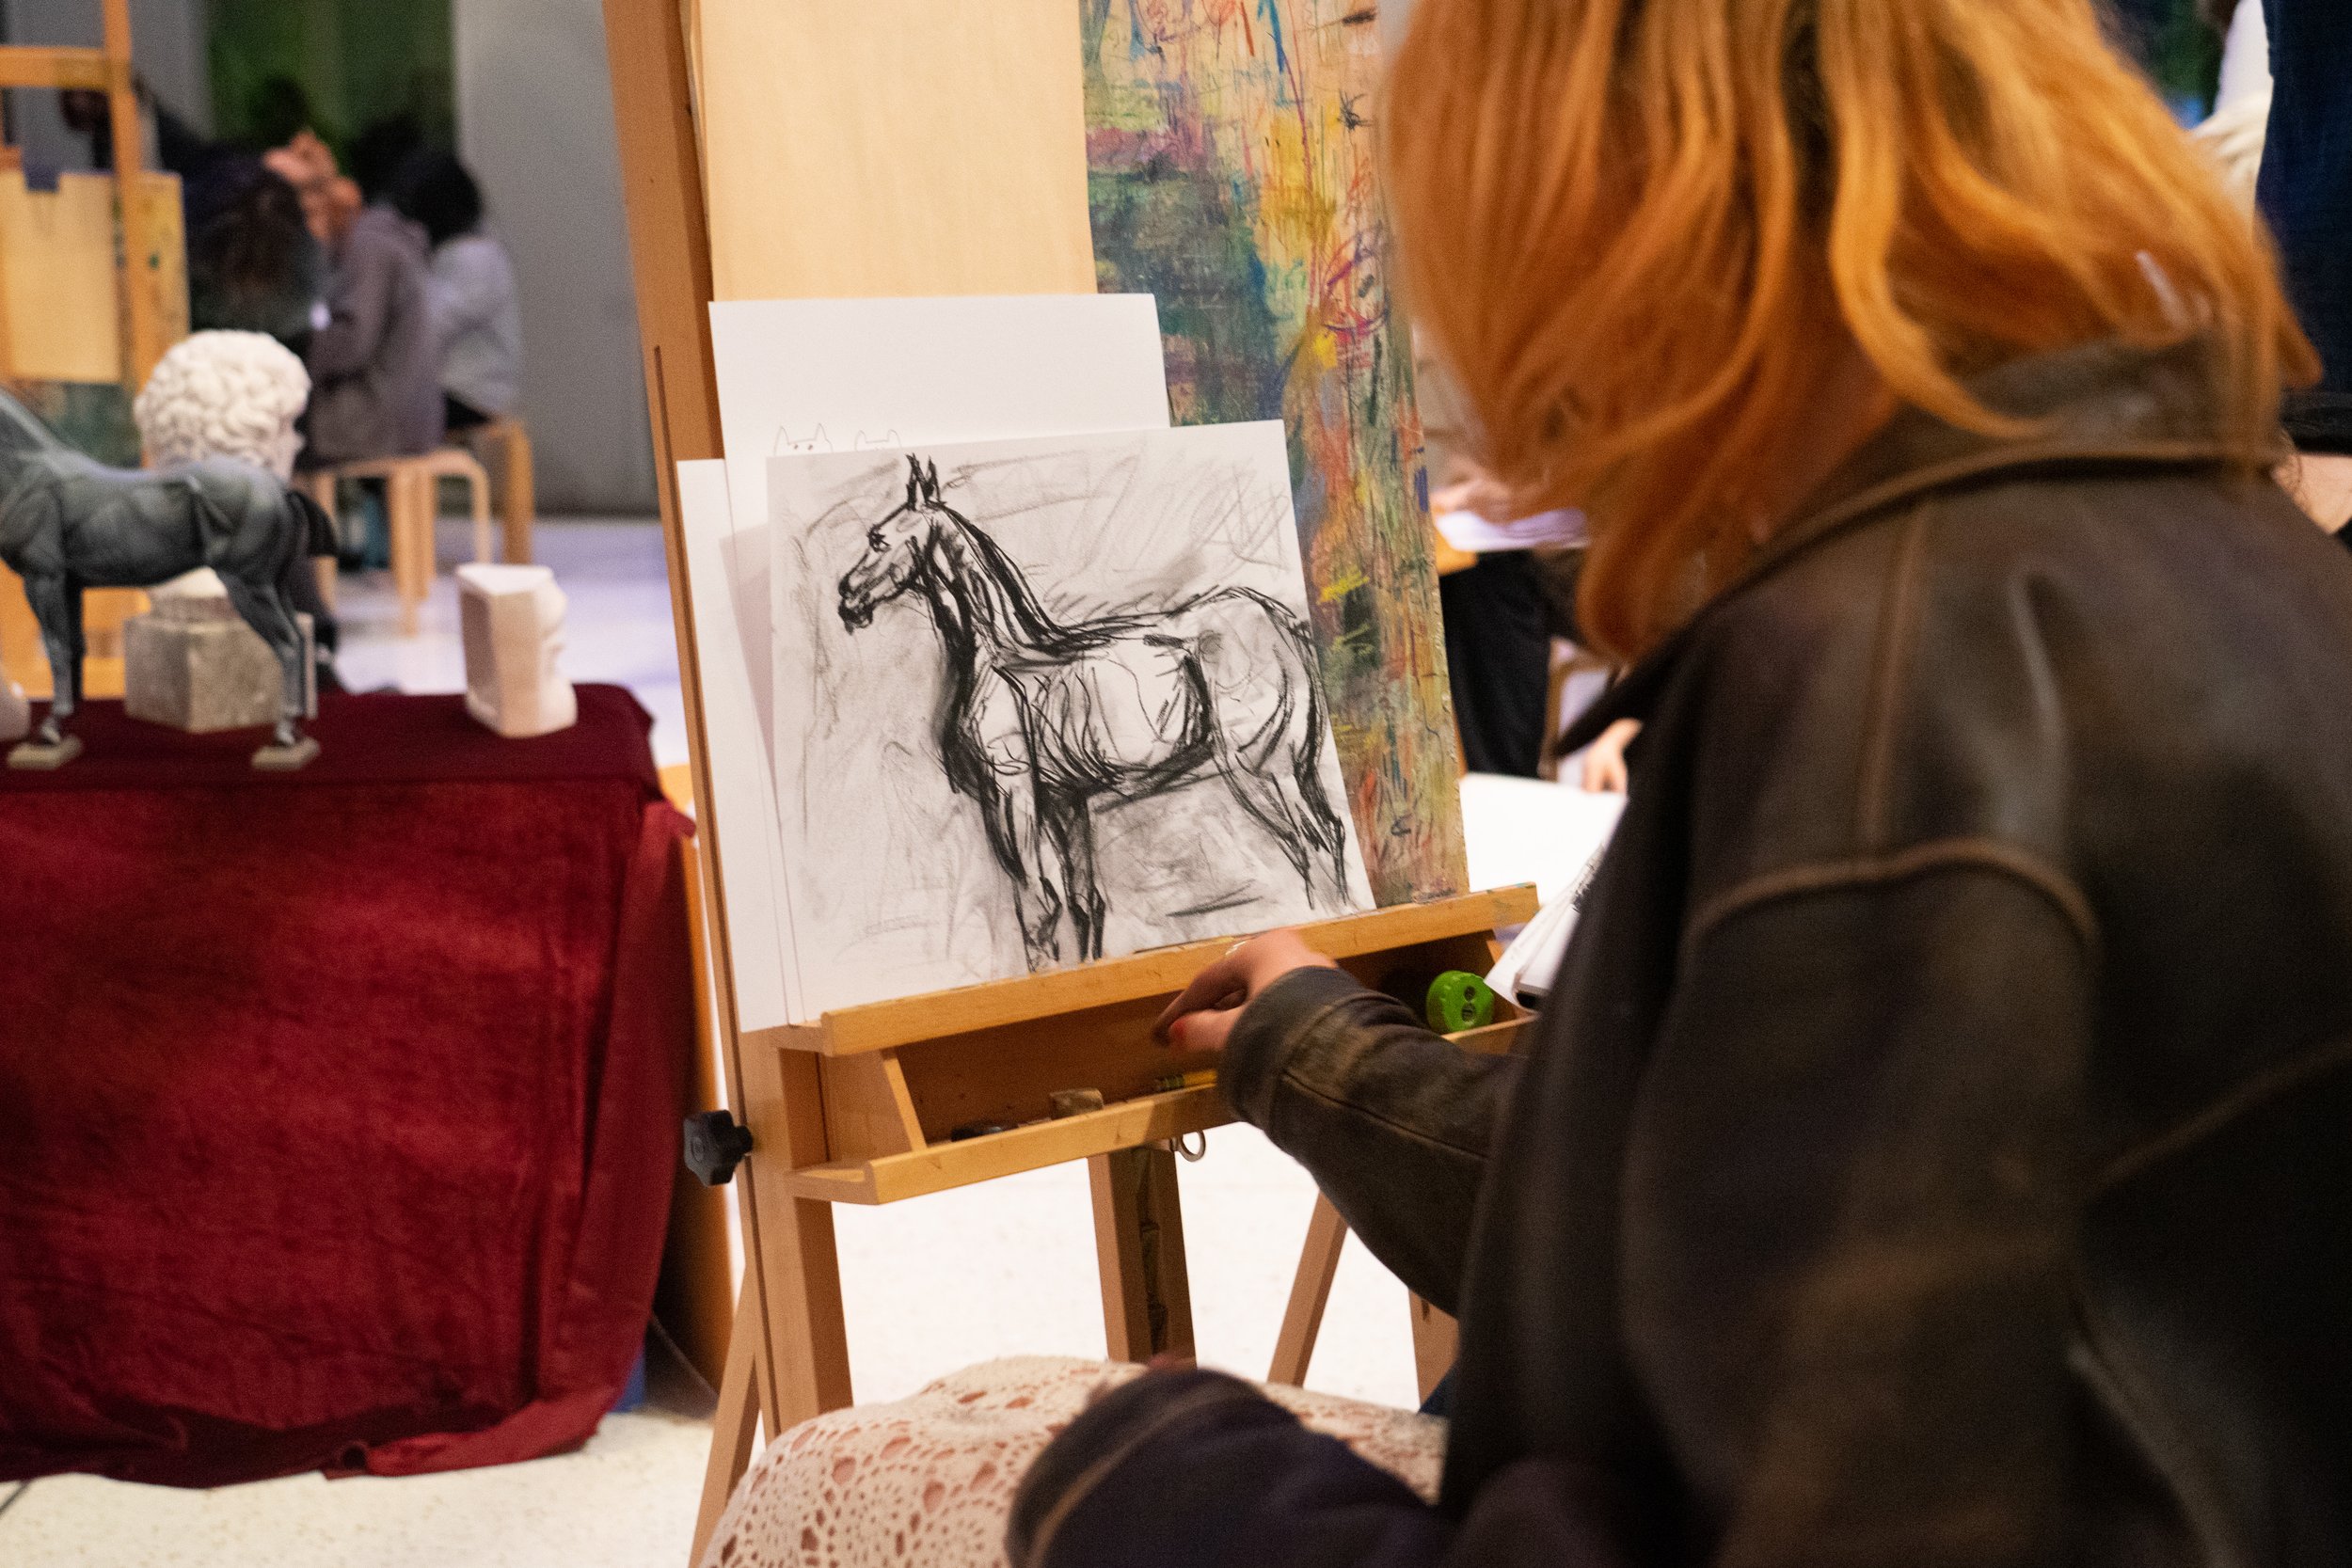  A teenage artist live-sketches a horse at the annual ‘Teen Night Out’ at Seattle Art Museum.  